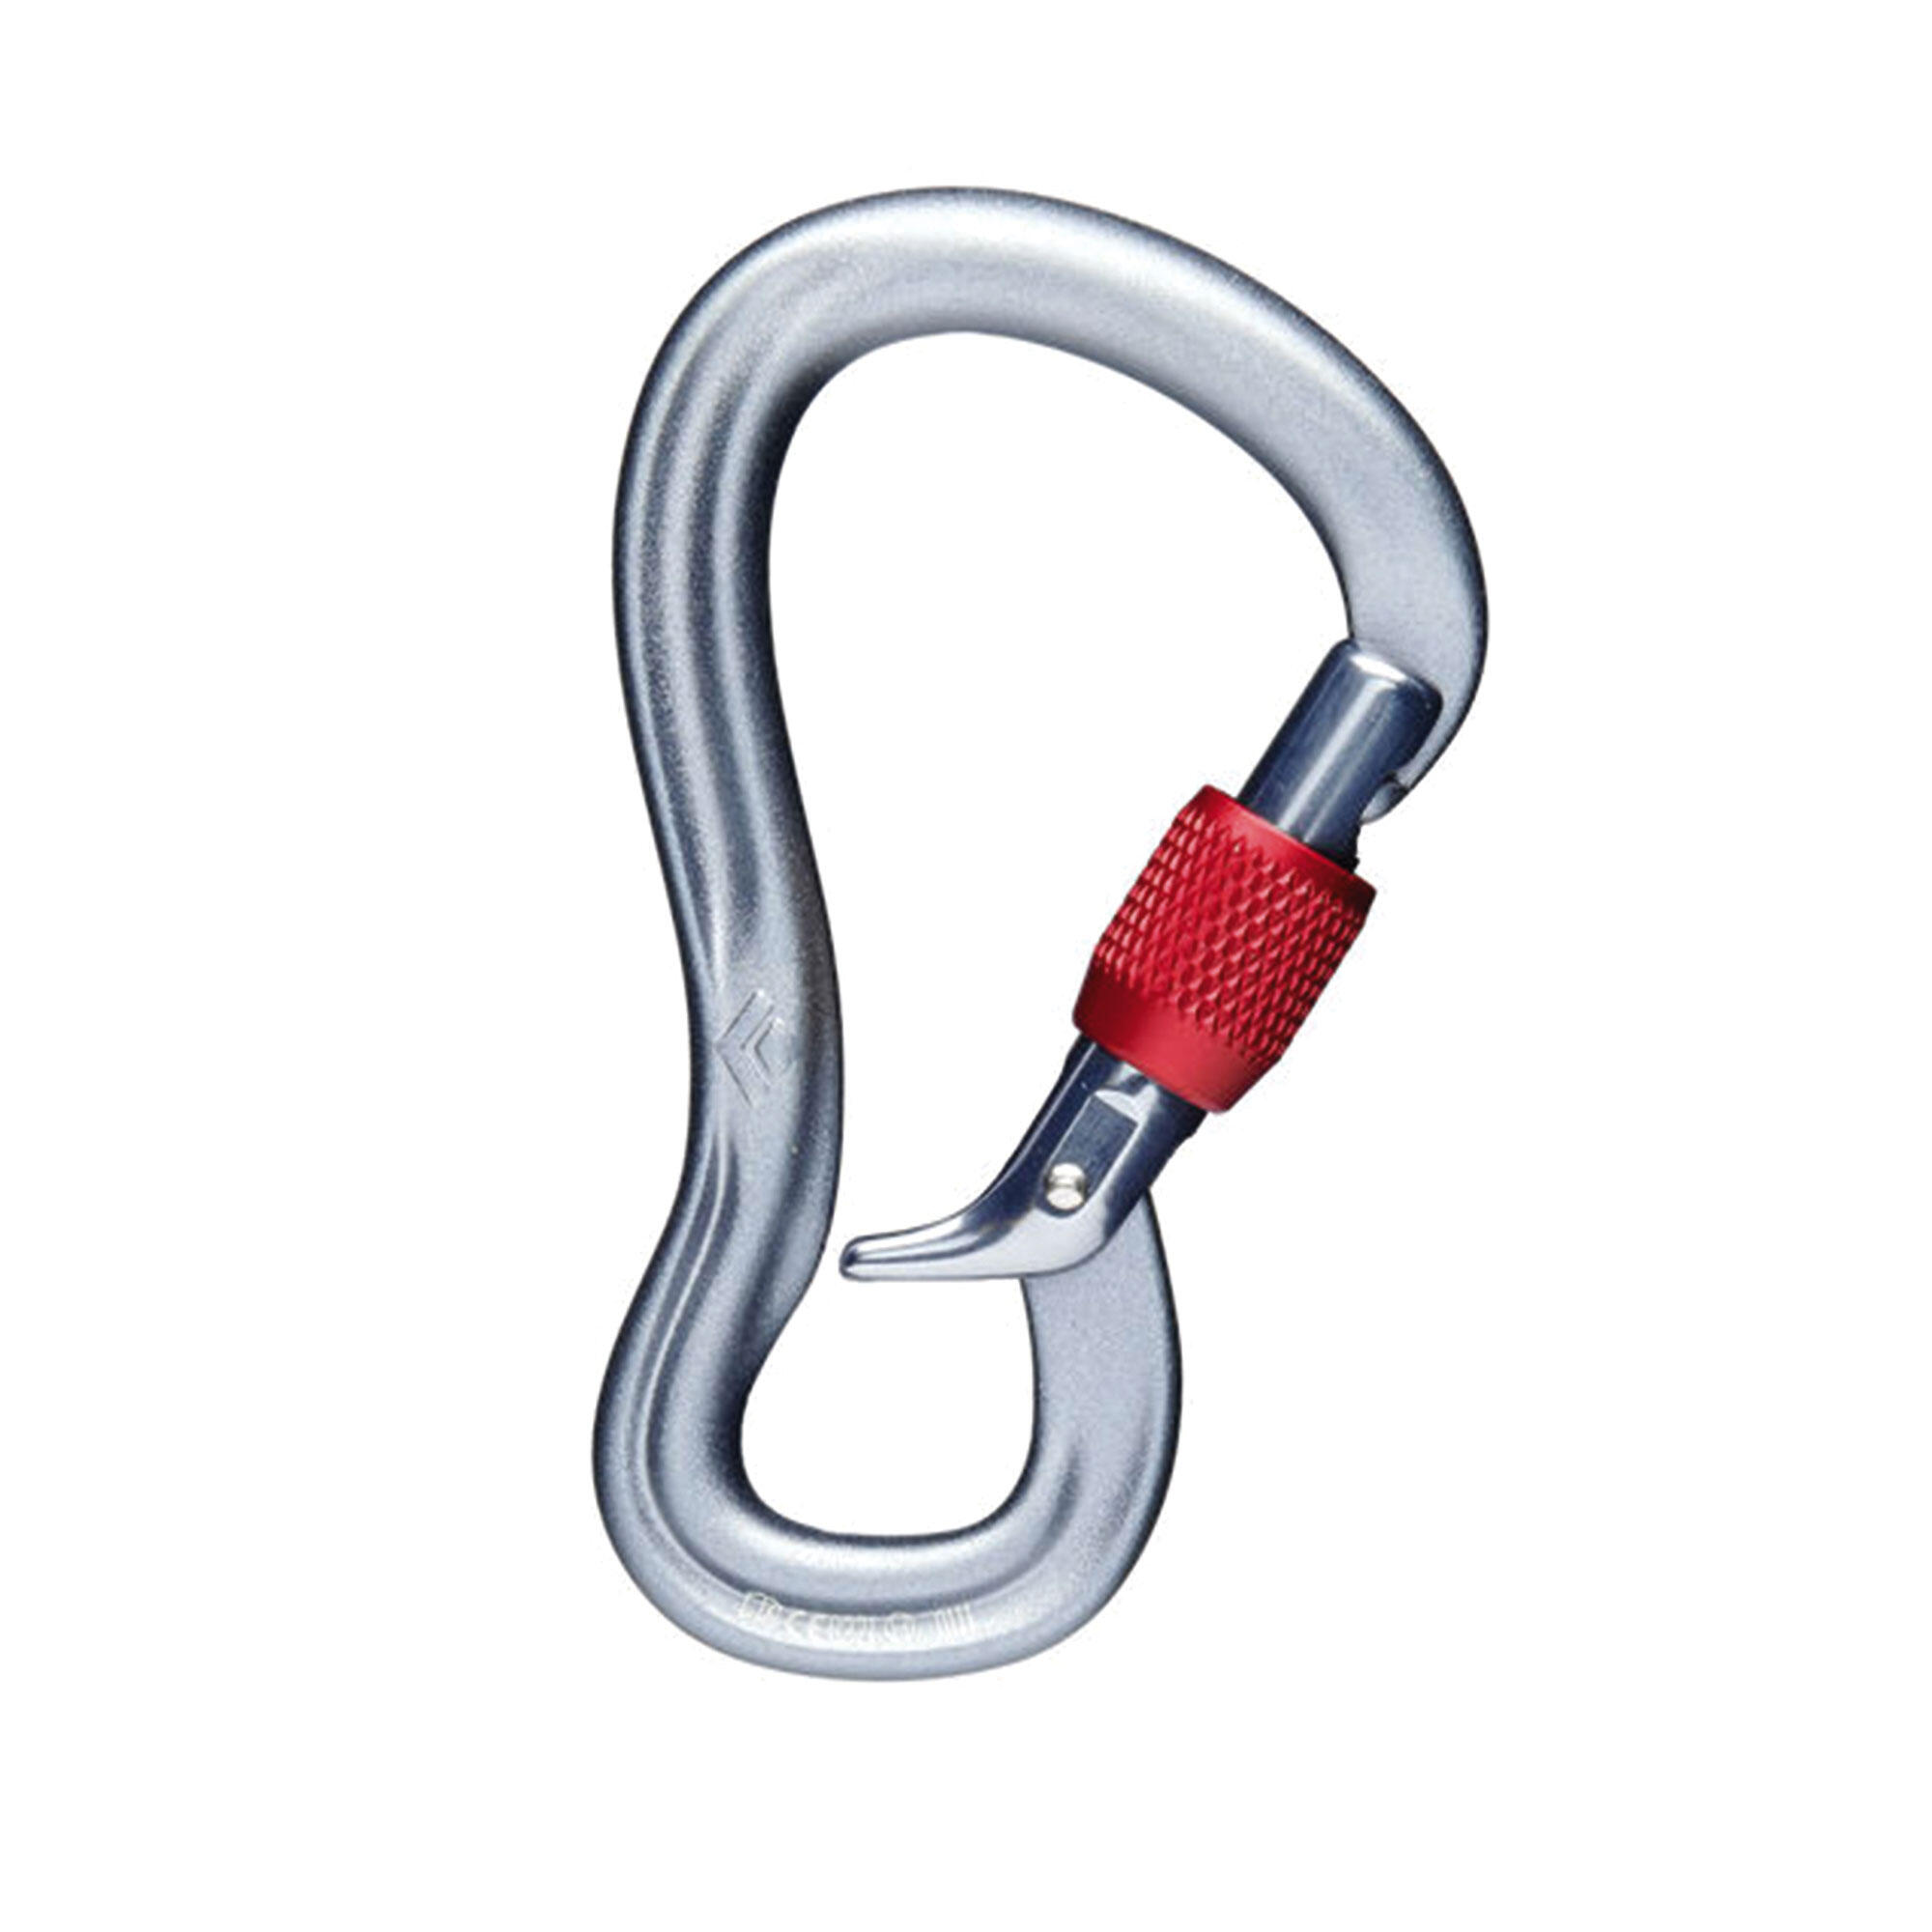 BLACK DIAMOND SAFETY CARABINER FOR CLIMBING AND MOUNTAINEERING - GRIDLOCK